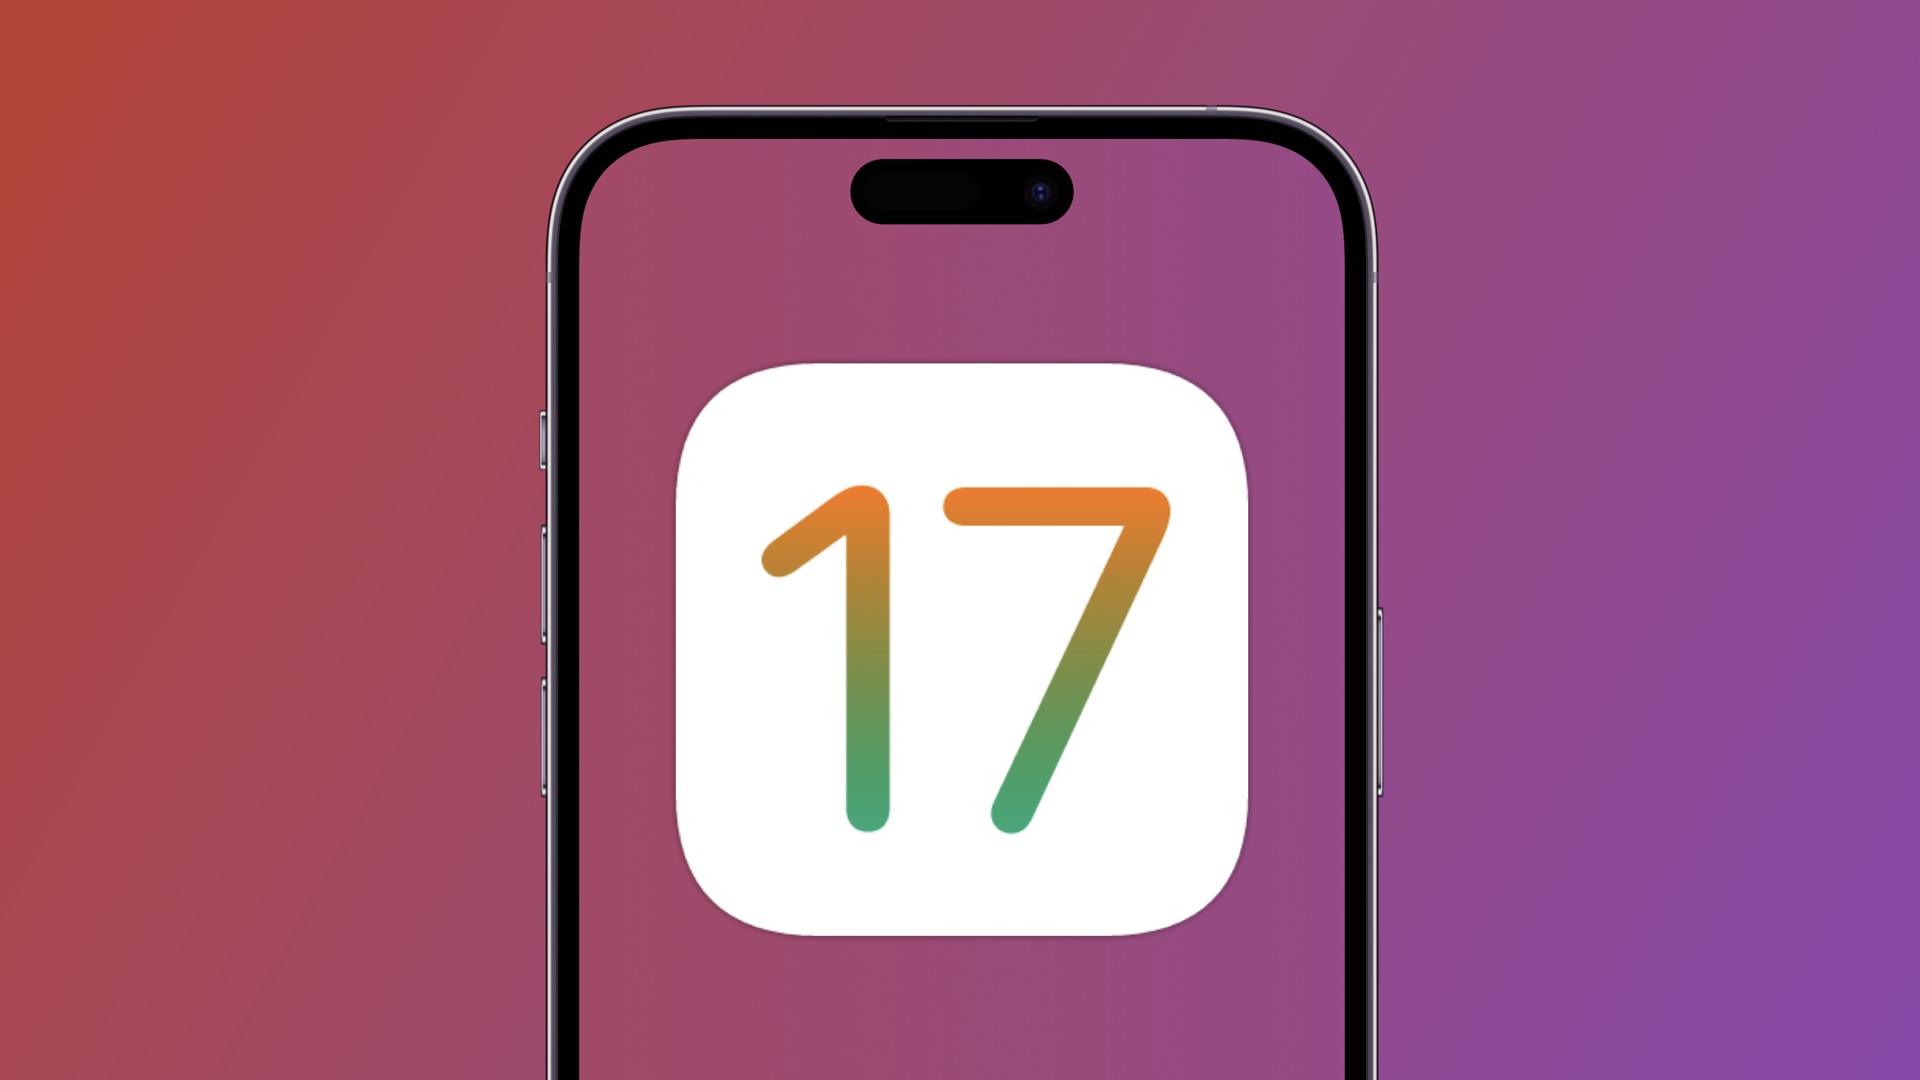 iOS 17 to Include ‘Most Requested Features’: Report